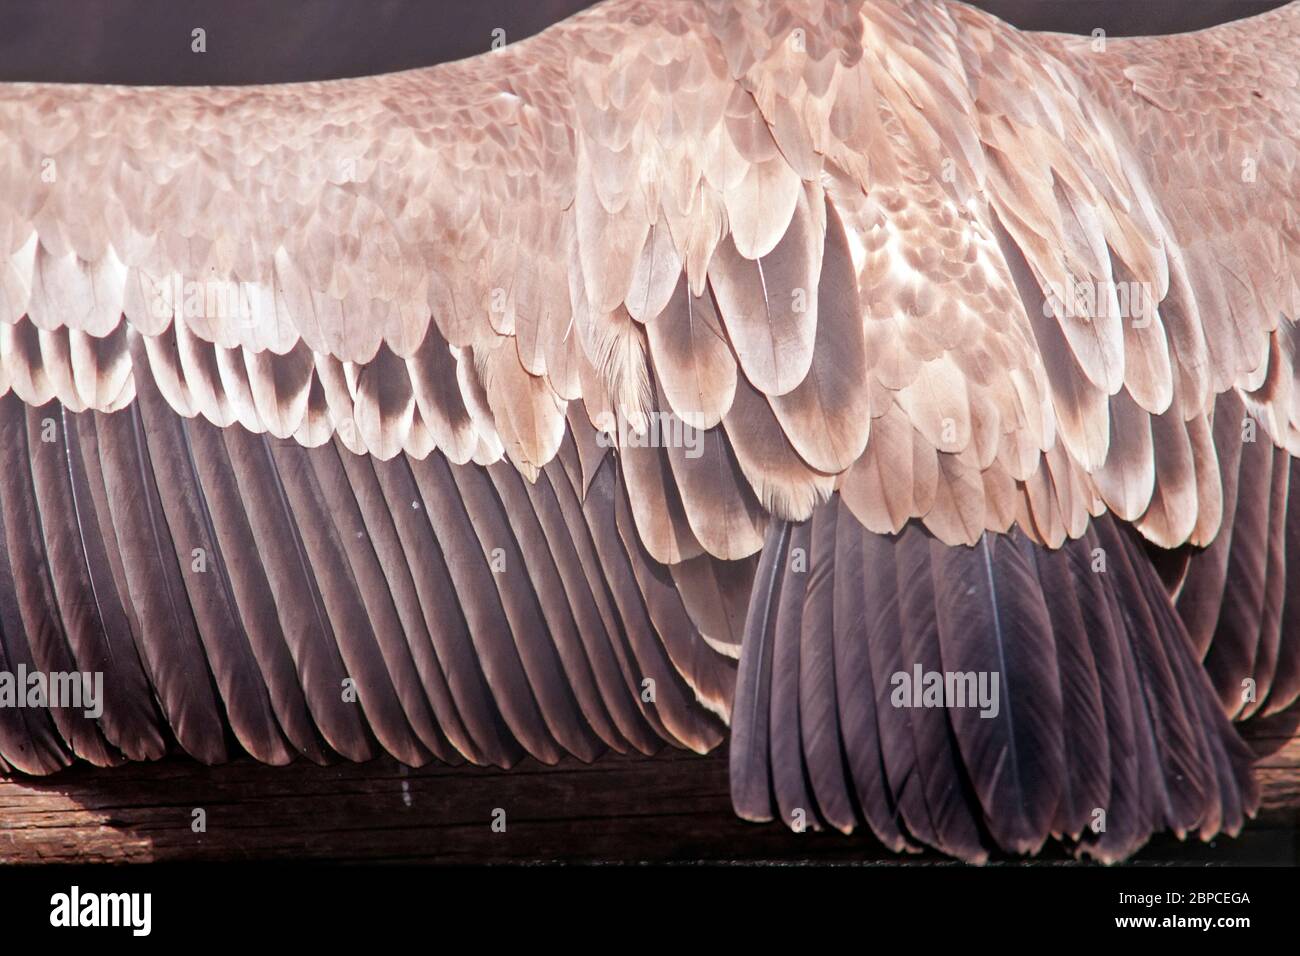 griffon-vulture-gyps-fulvus-tail-and-wing-feathers-stock-photo-alamy